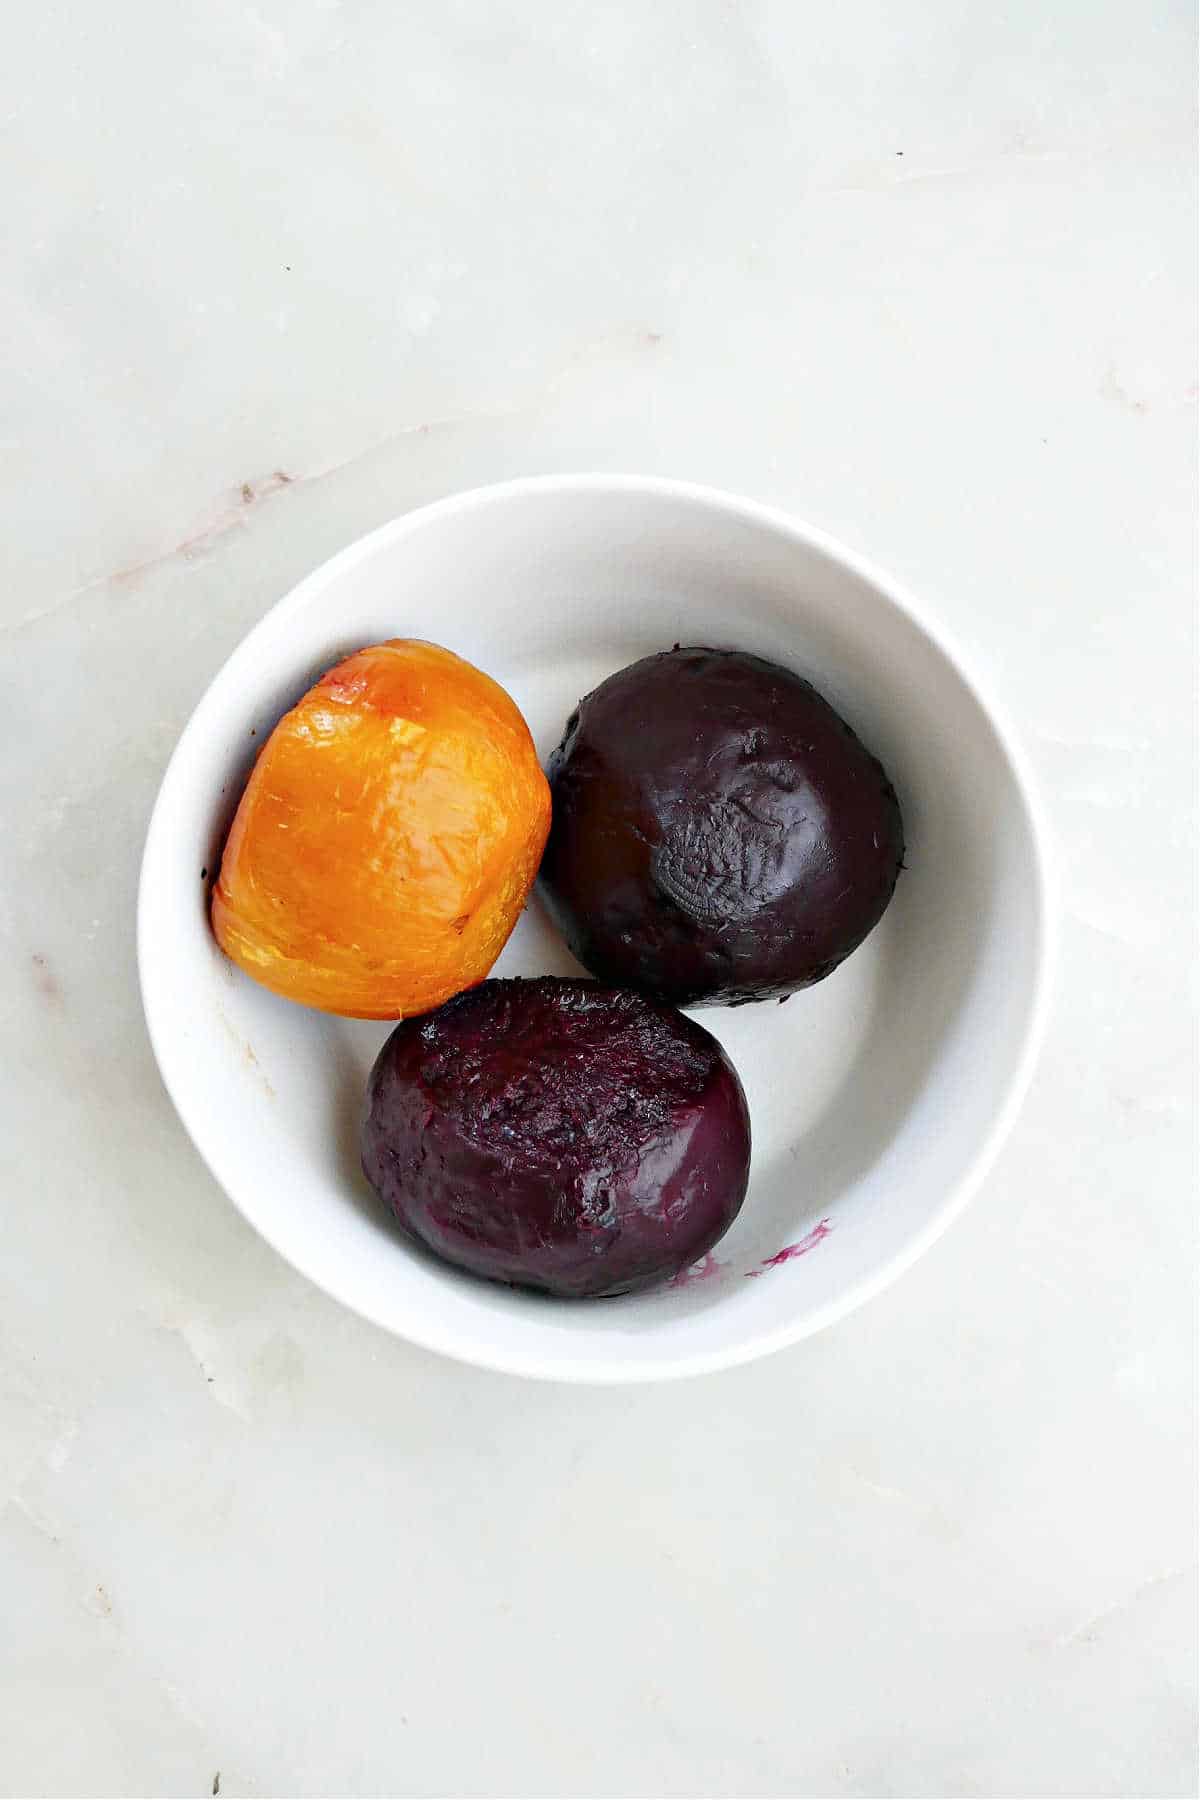 2 roasted red beets and 1 roasted golden beet in a bowl on a counter